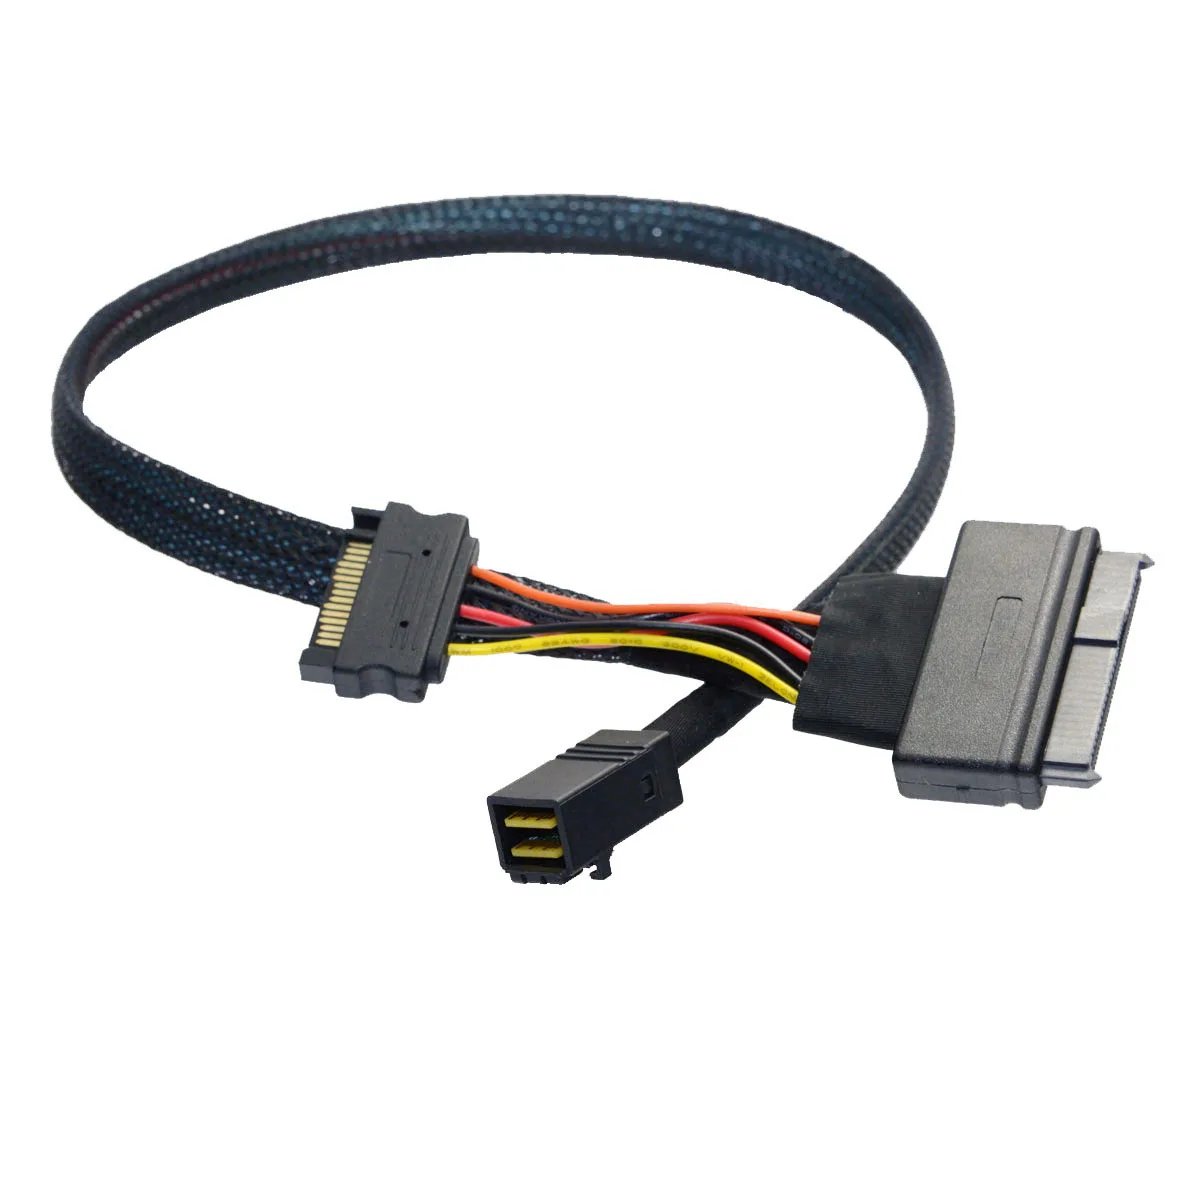 

1m 0.5m HD Mini-SAS (SFF-8643) To U.2 SFF-8639 Date Cable For 2.5" NVMe SSDWith 15-Pin SATA Power Suitable For U.2 SSD Mining